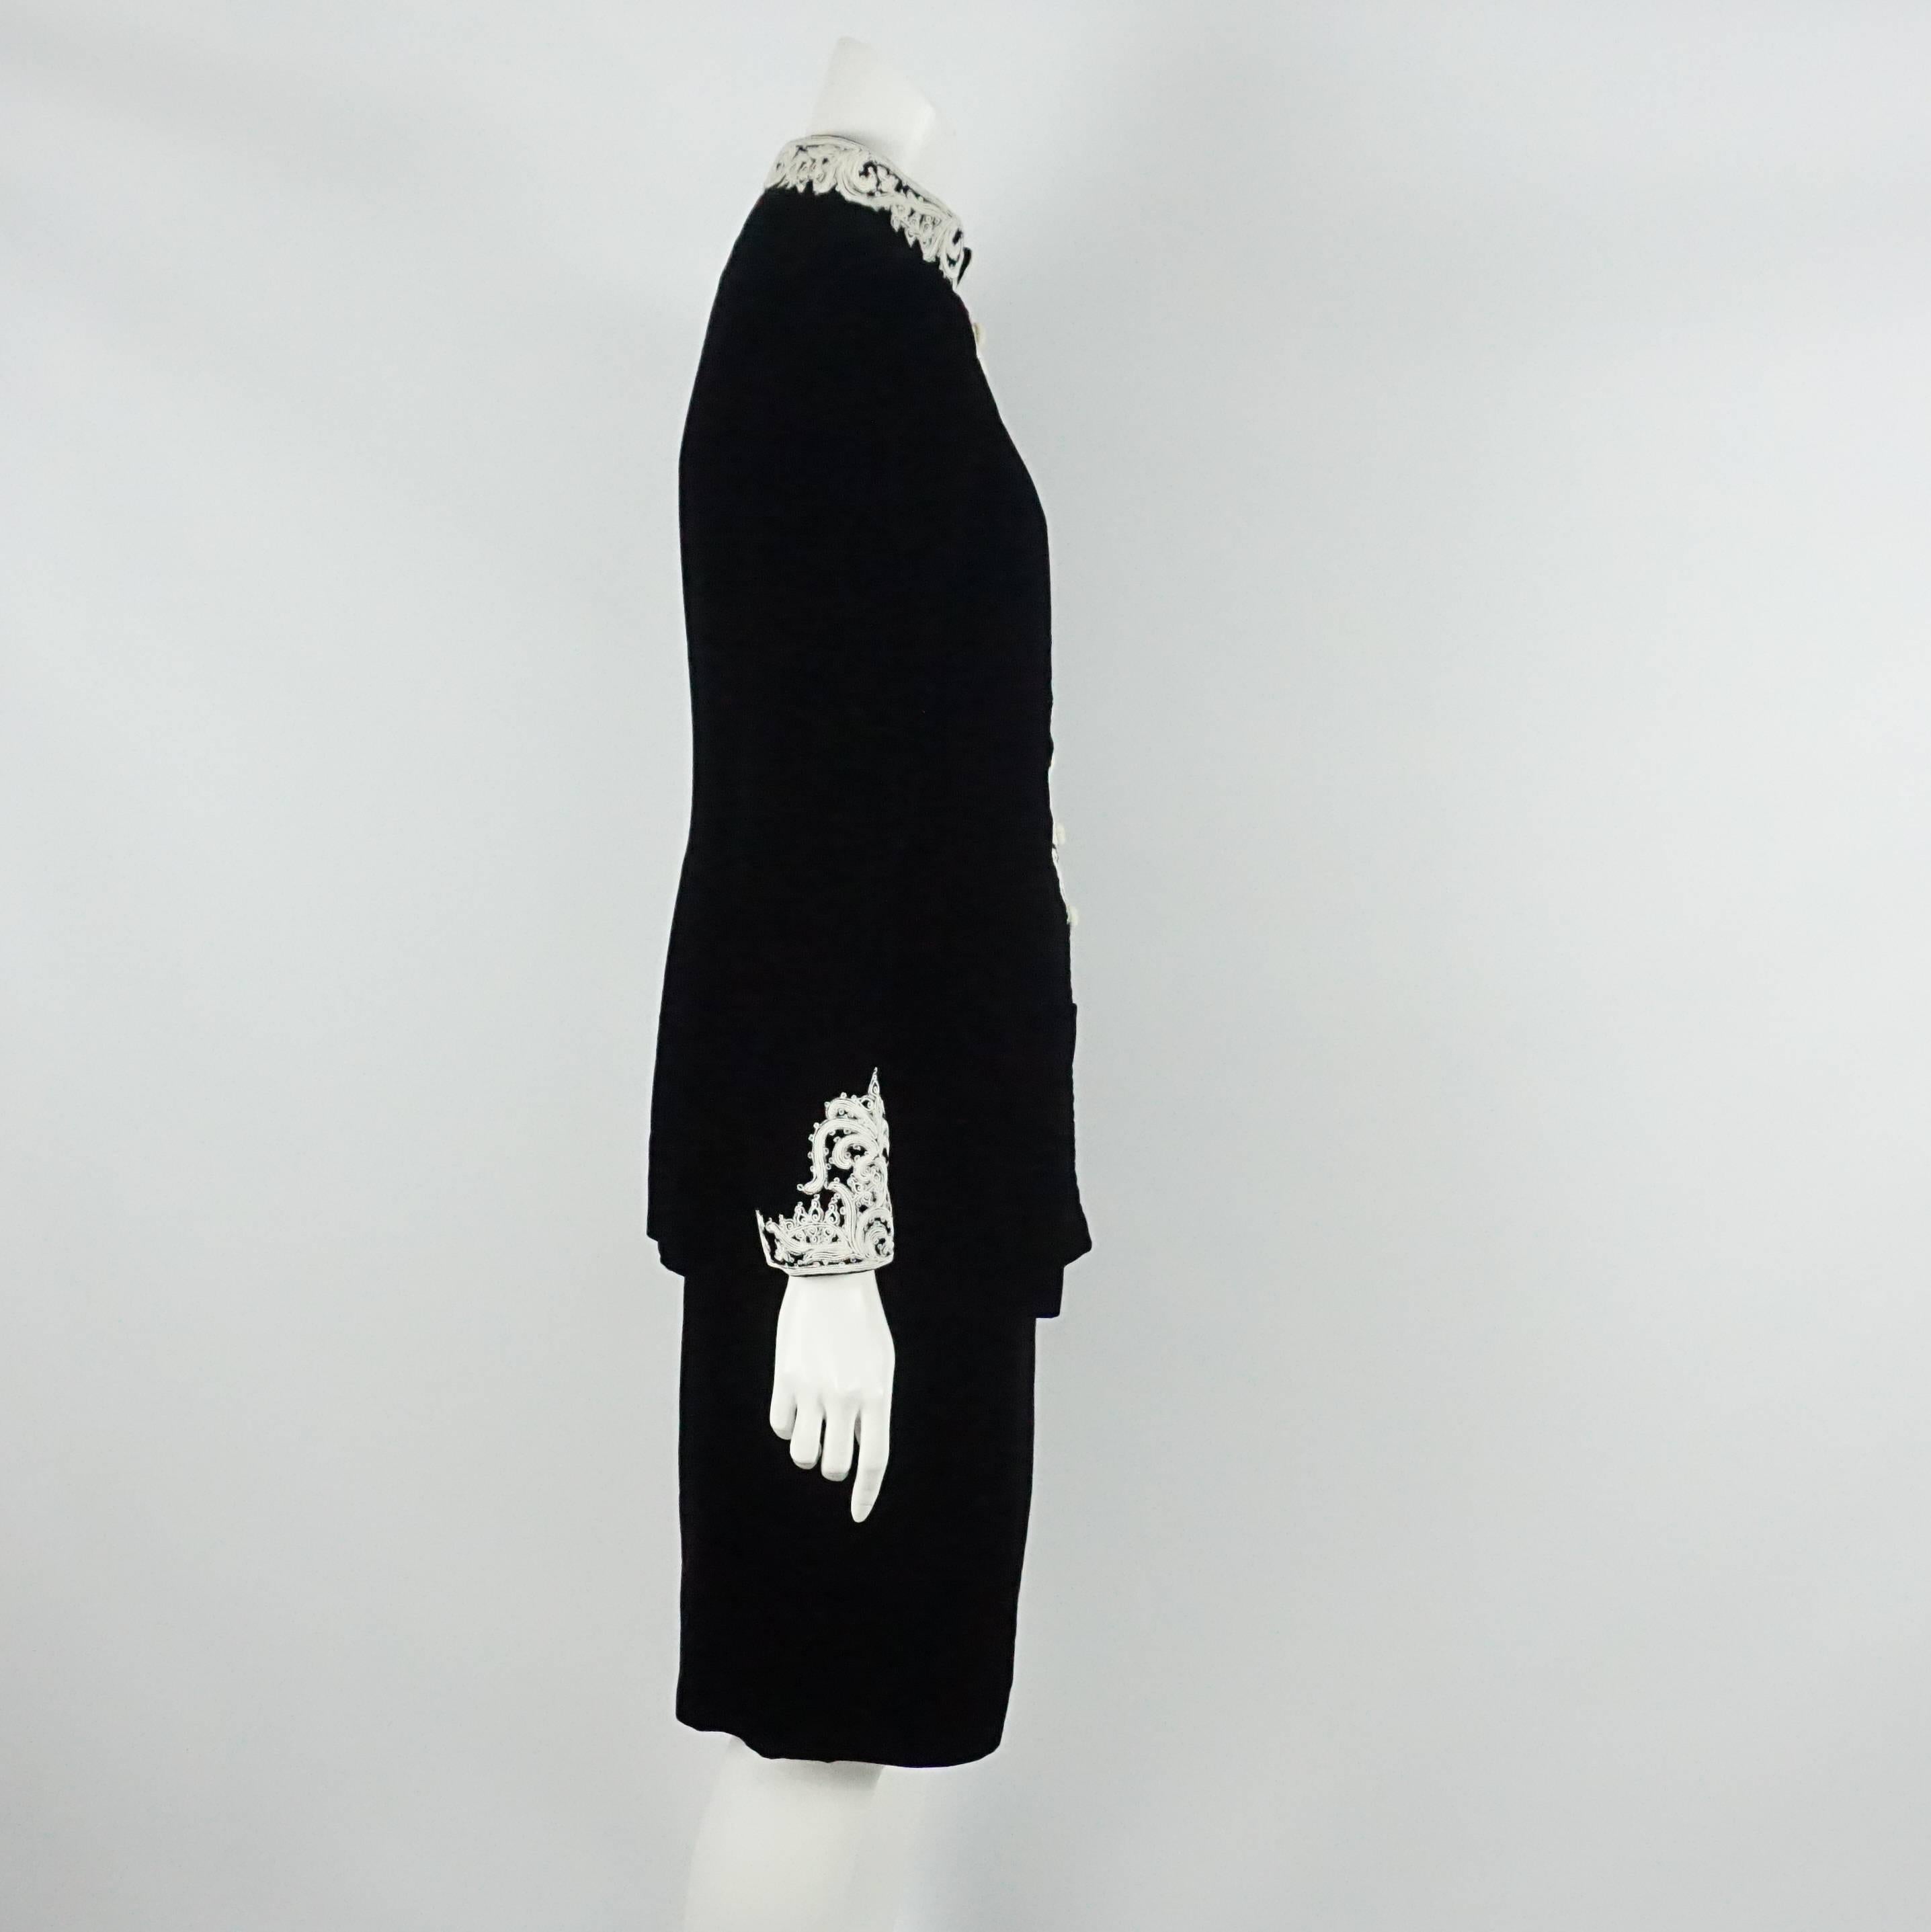 Oscar de la Renta Black Velvet Skirt Suit with White Embroidery - 10 - 1990s. This skirt suit is in excellent vintage condition with light wear to the velvet and embroidery. The jacket features an oriental collar, an embroidered trim, shoulder pads,